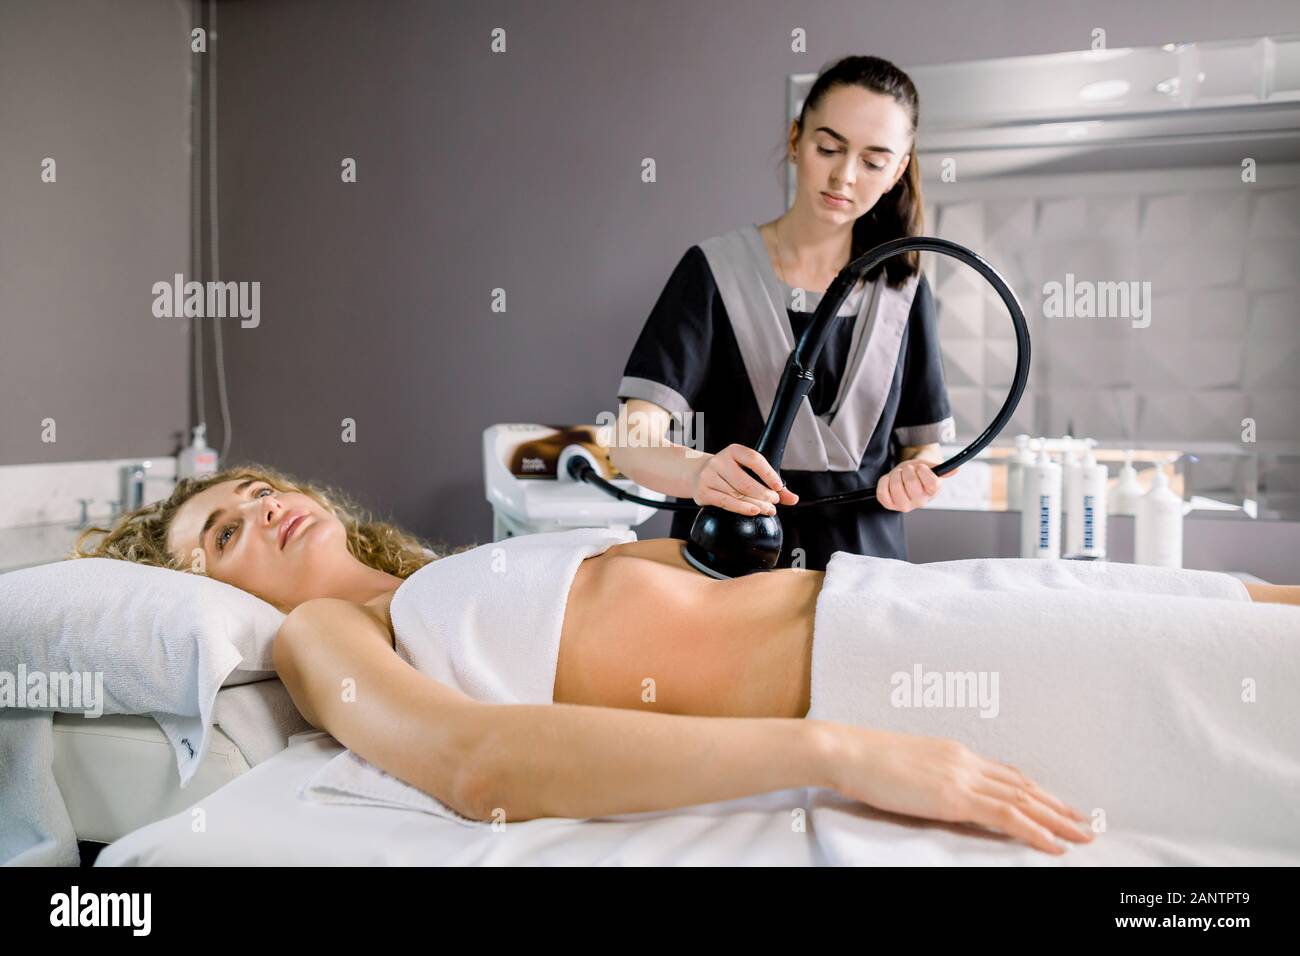 Attractive young blond woman client with slim fit body getting anticellulite and anti fat therapy in beauty salon on her belly. Skin and body care Stock Photo